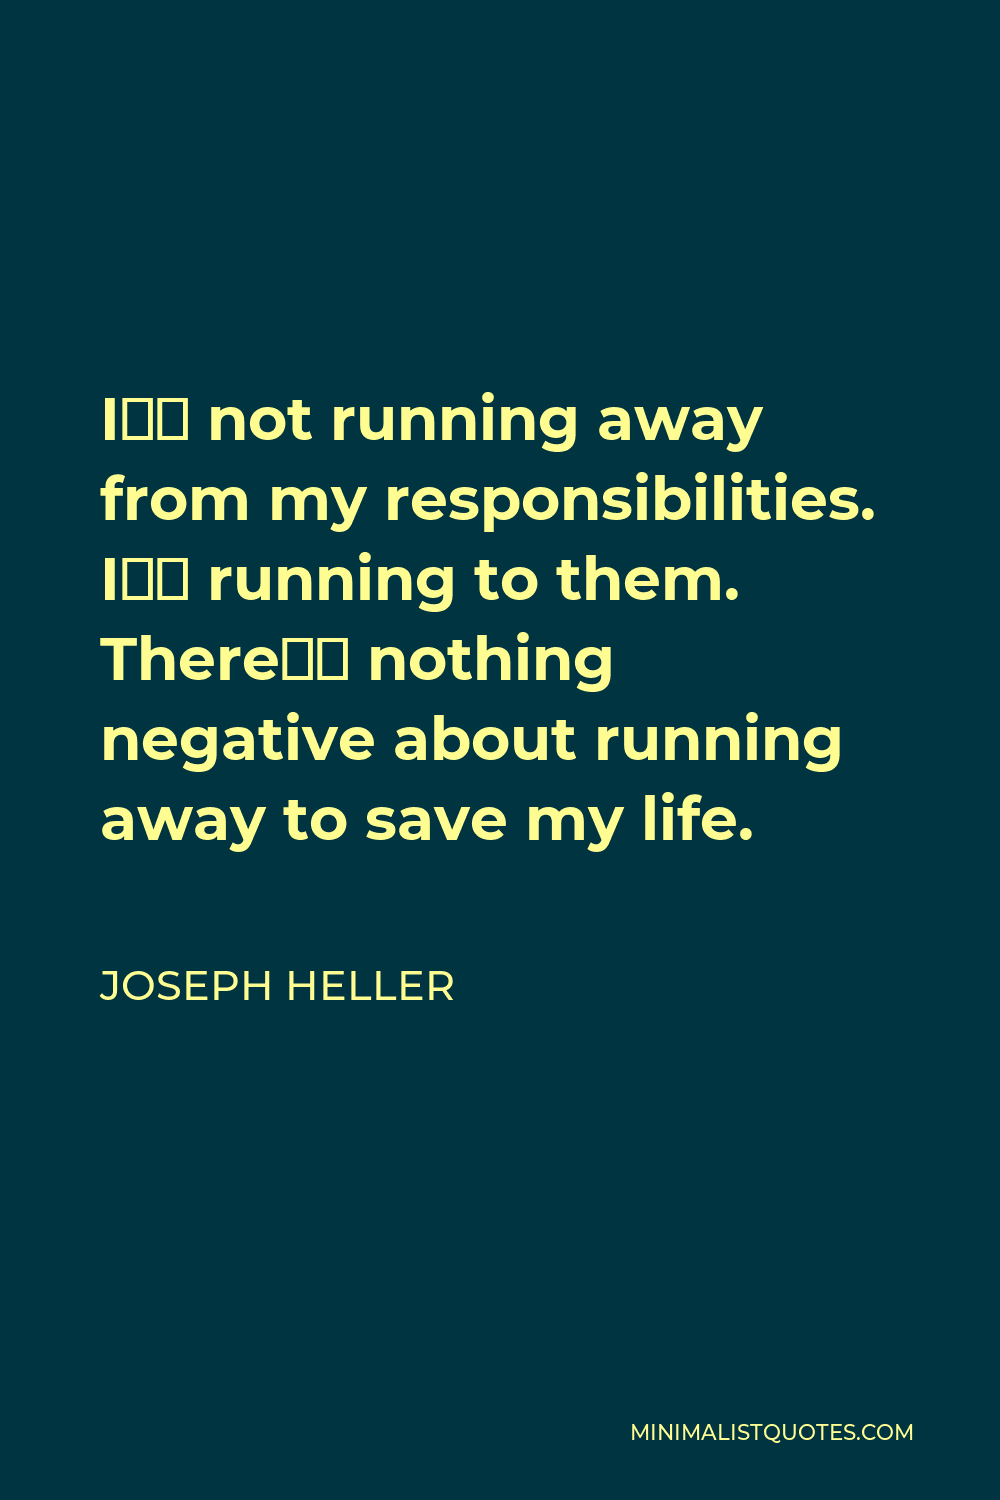 Joseph Heller Quote I’m Not Running Away From My Responsibilities I’m Running To Them There’s